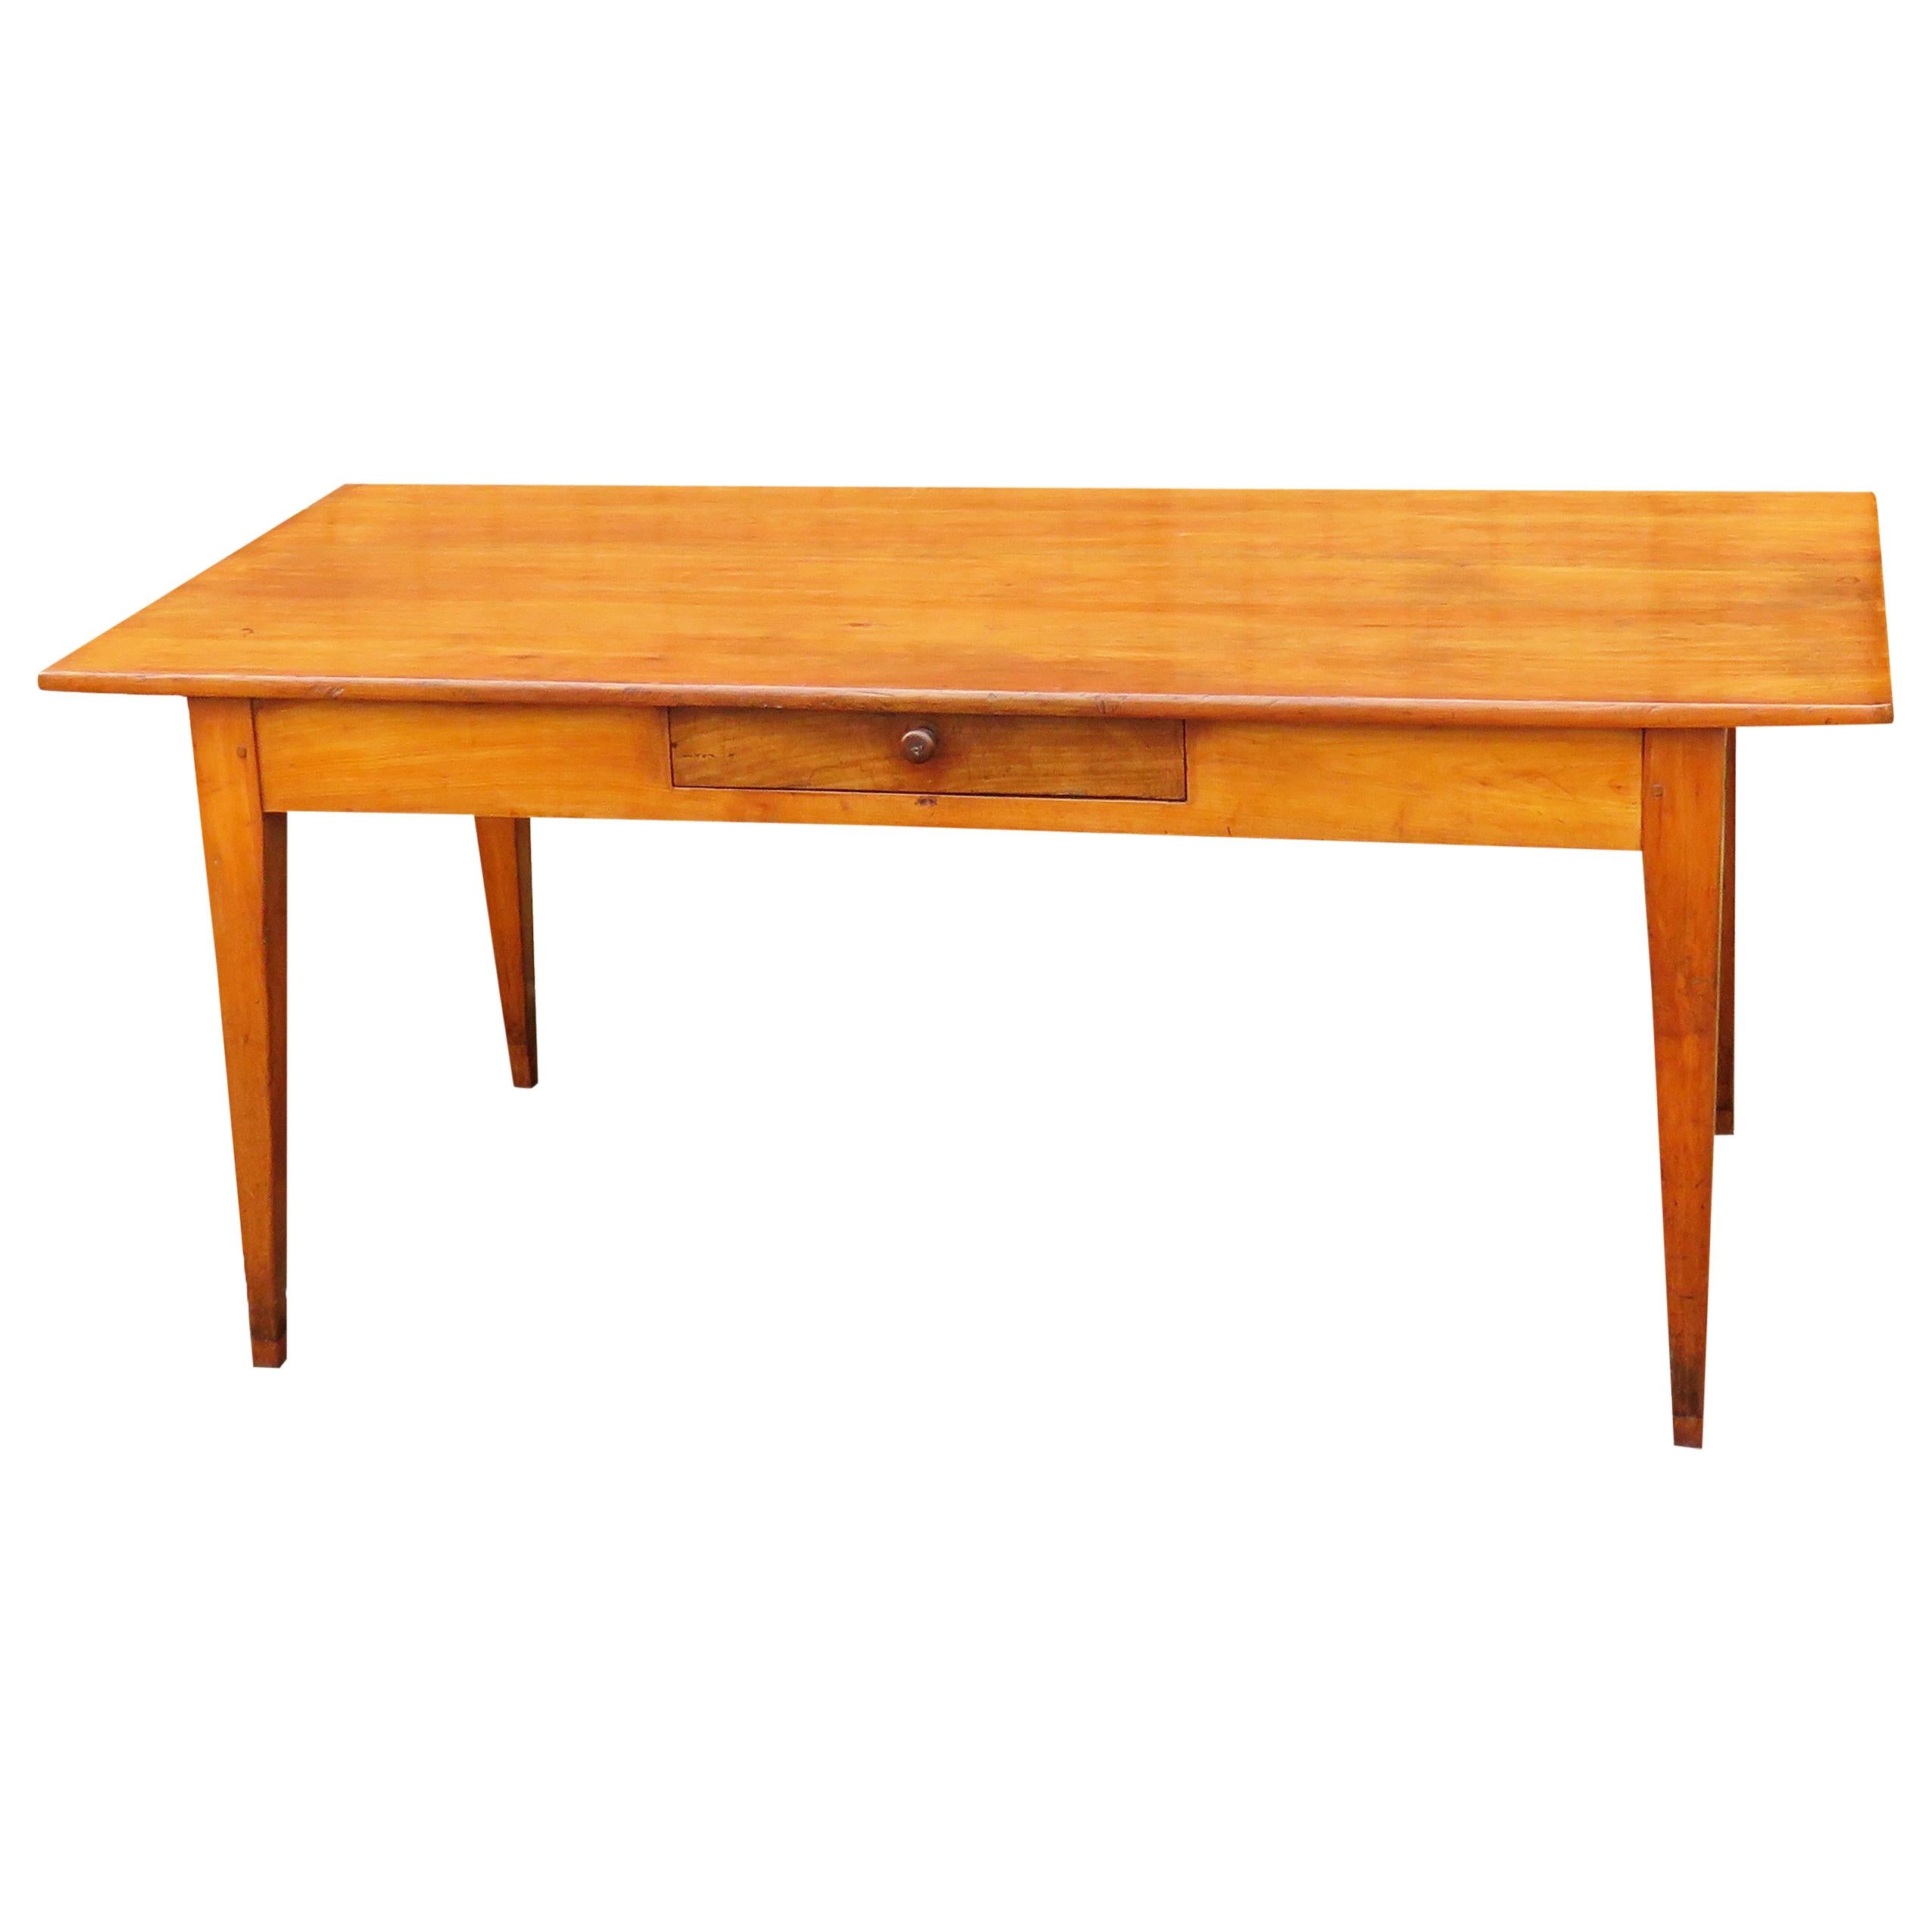 19th Century French Cherrywood Farmhouse Antique Dining Table